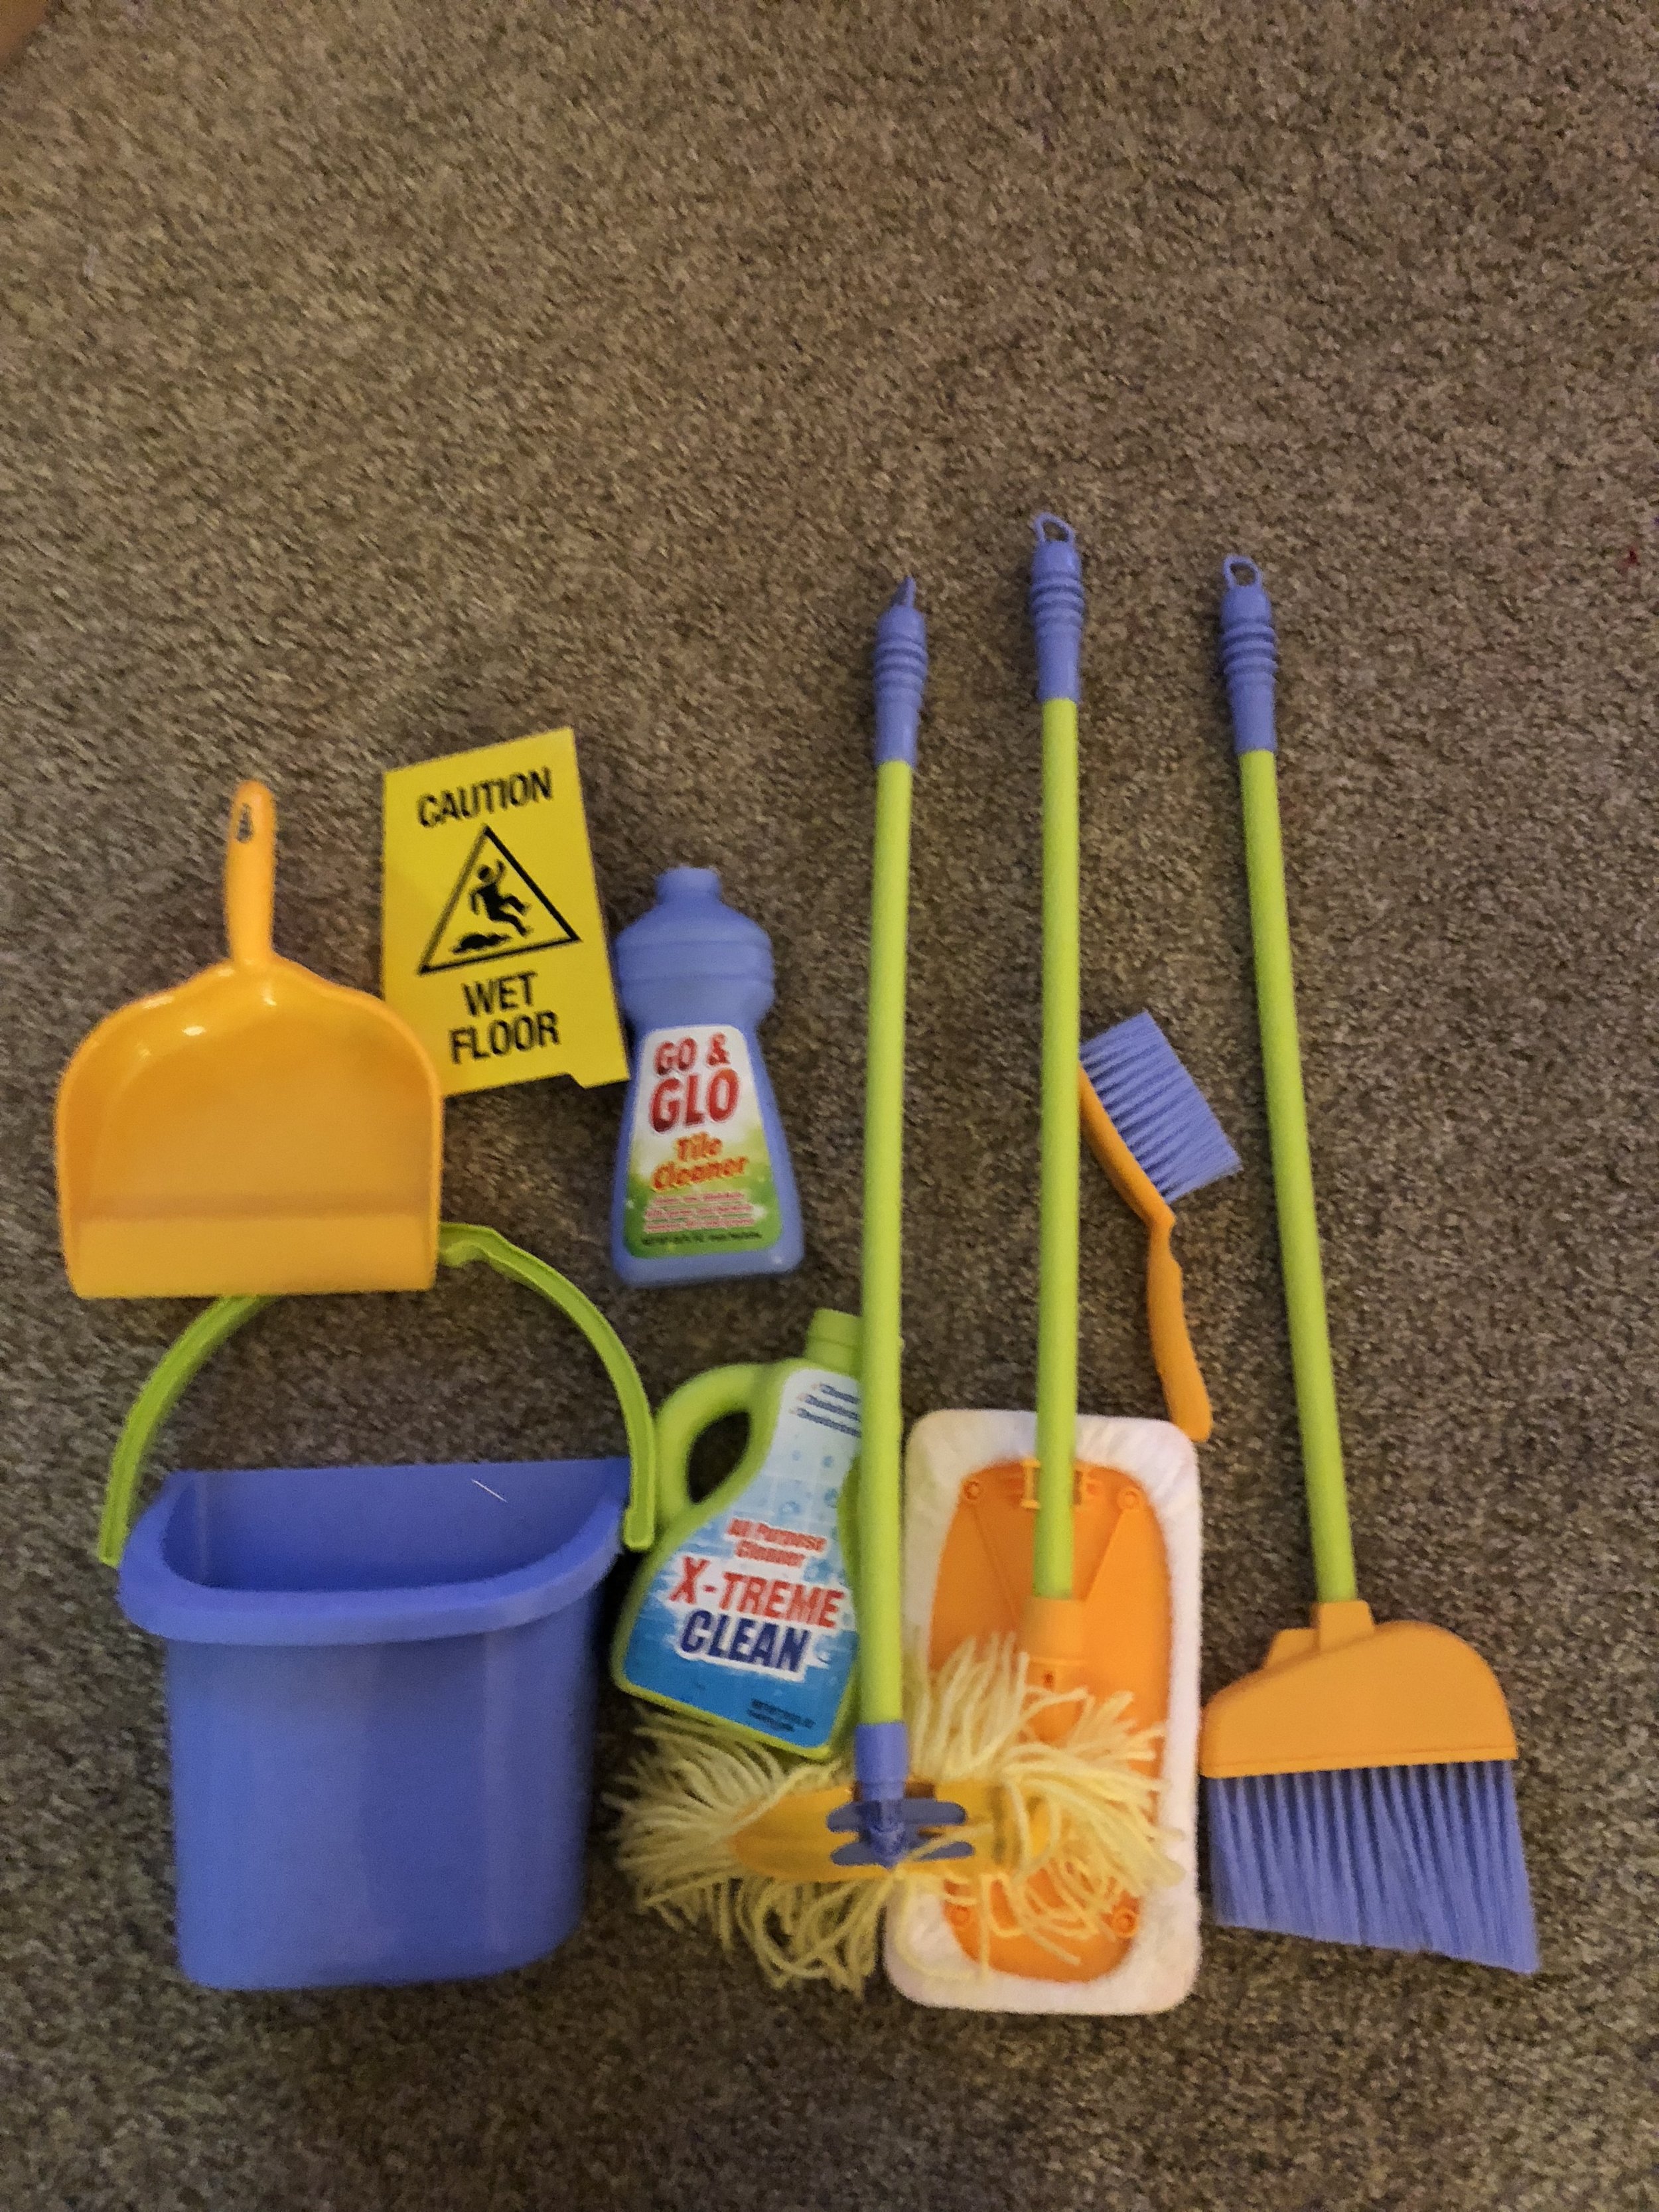 Kidzlane Kids Cleaning Set for Toddlers Kids Broom Set for Kids for Play